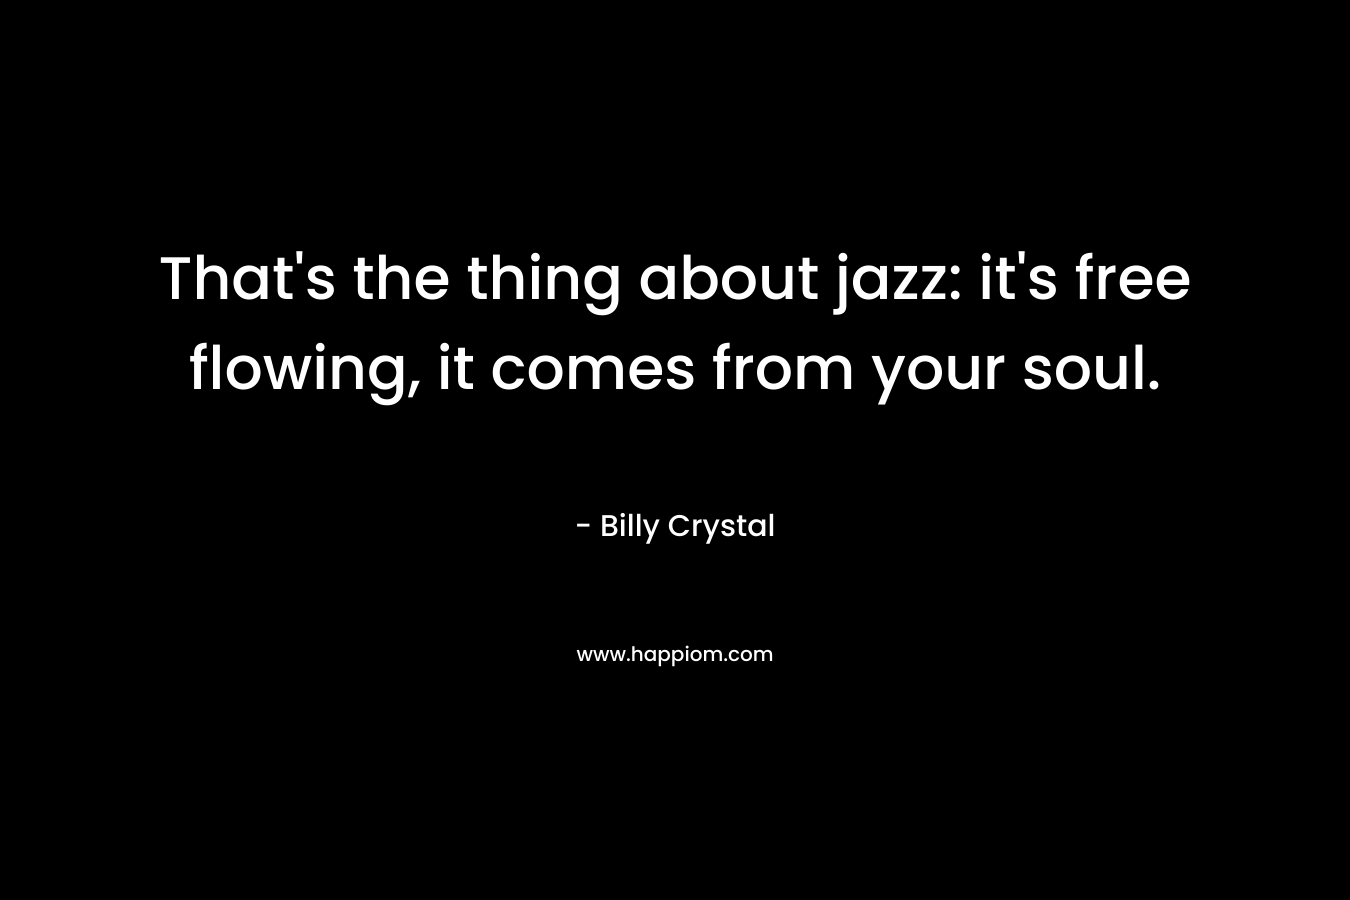 That's the thing about jazz: it's free flowing, it comes from your soul.